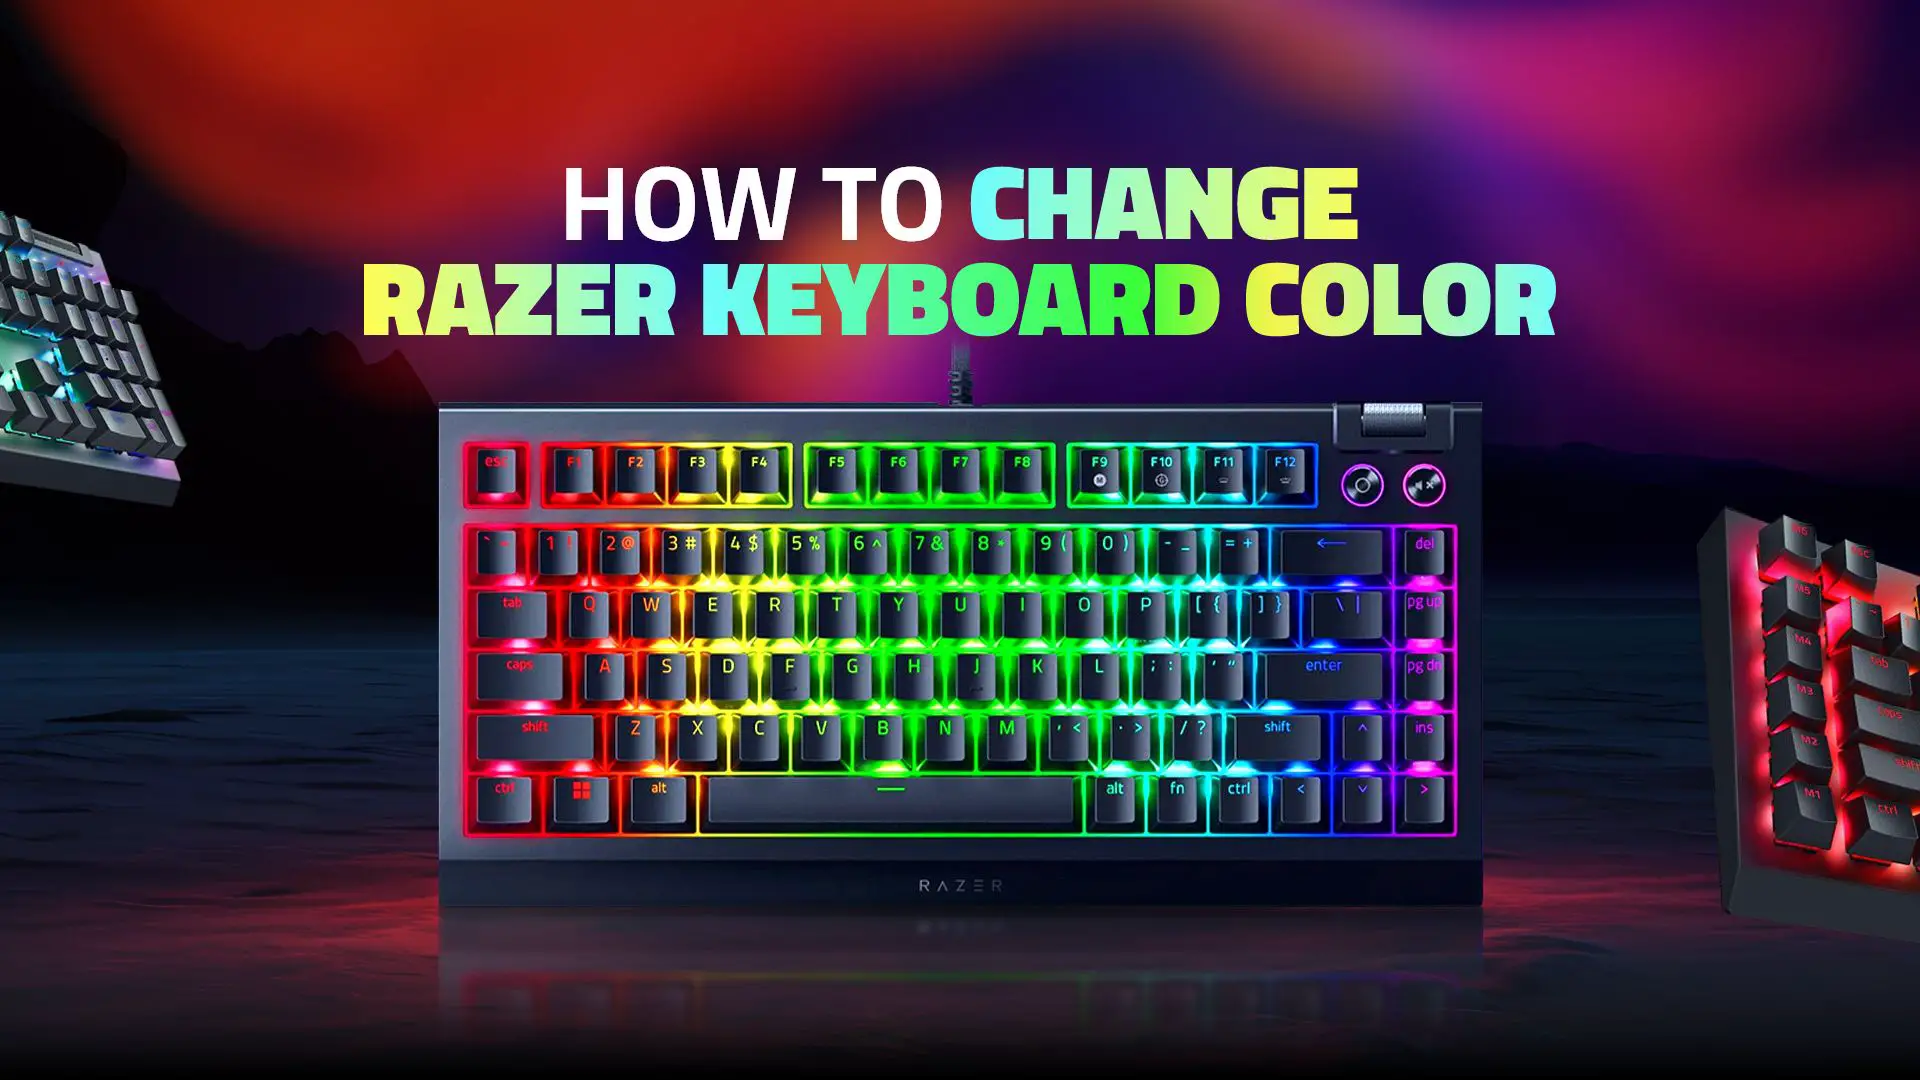 How to Change Razer Keyboard Color